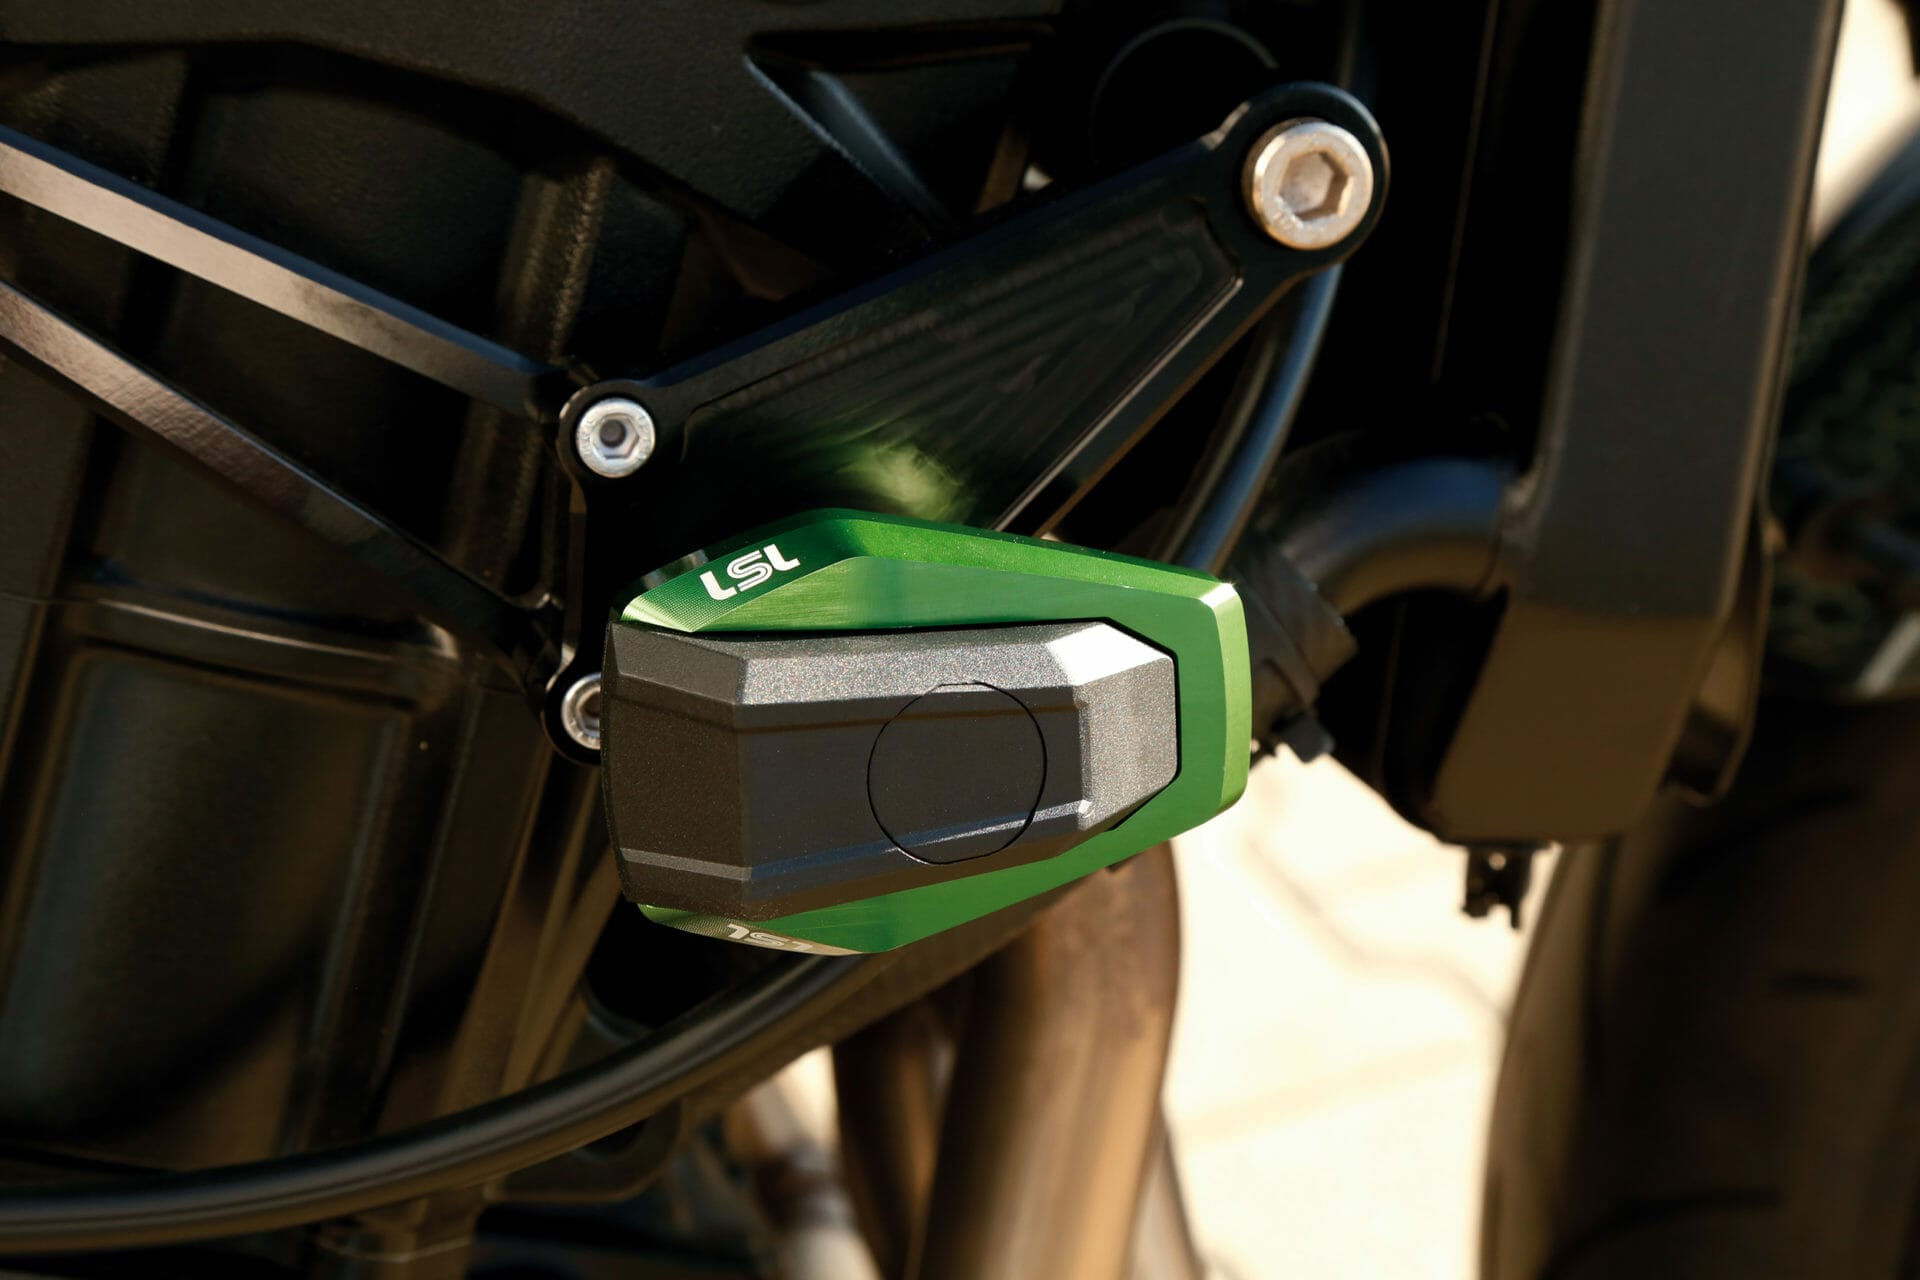 #LSL: New #ChrashPads
- also in the app Motorcycle News